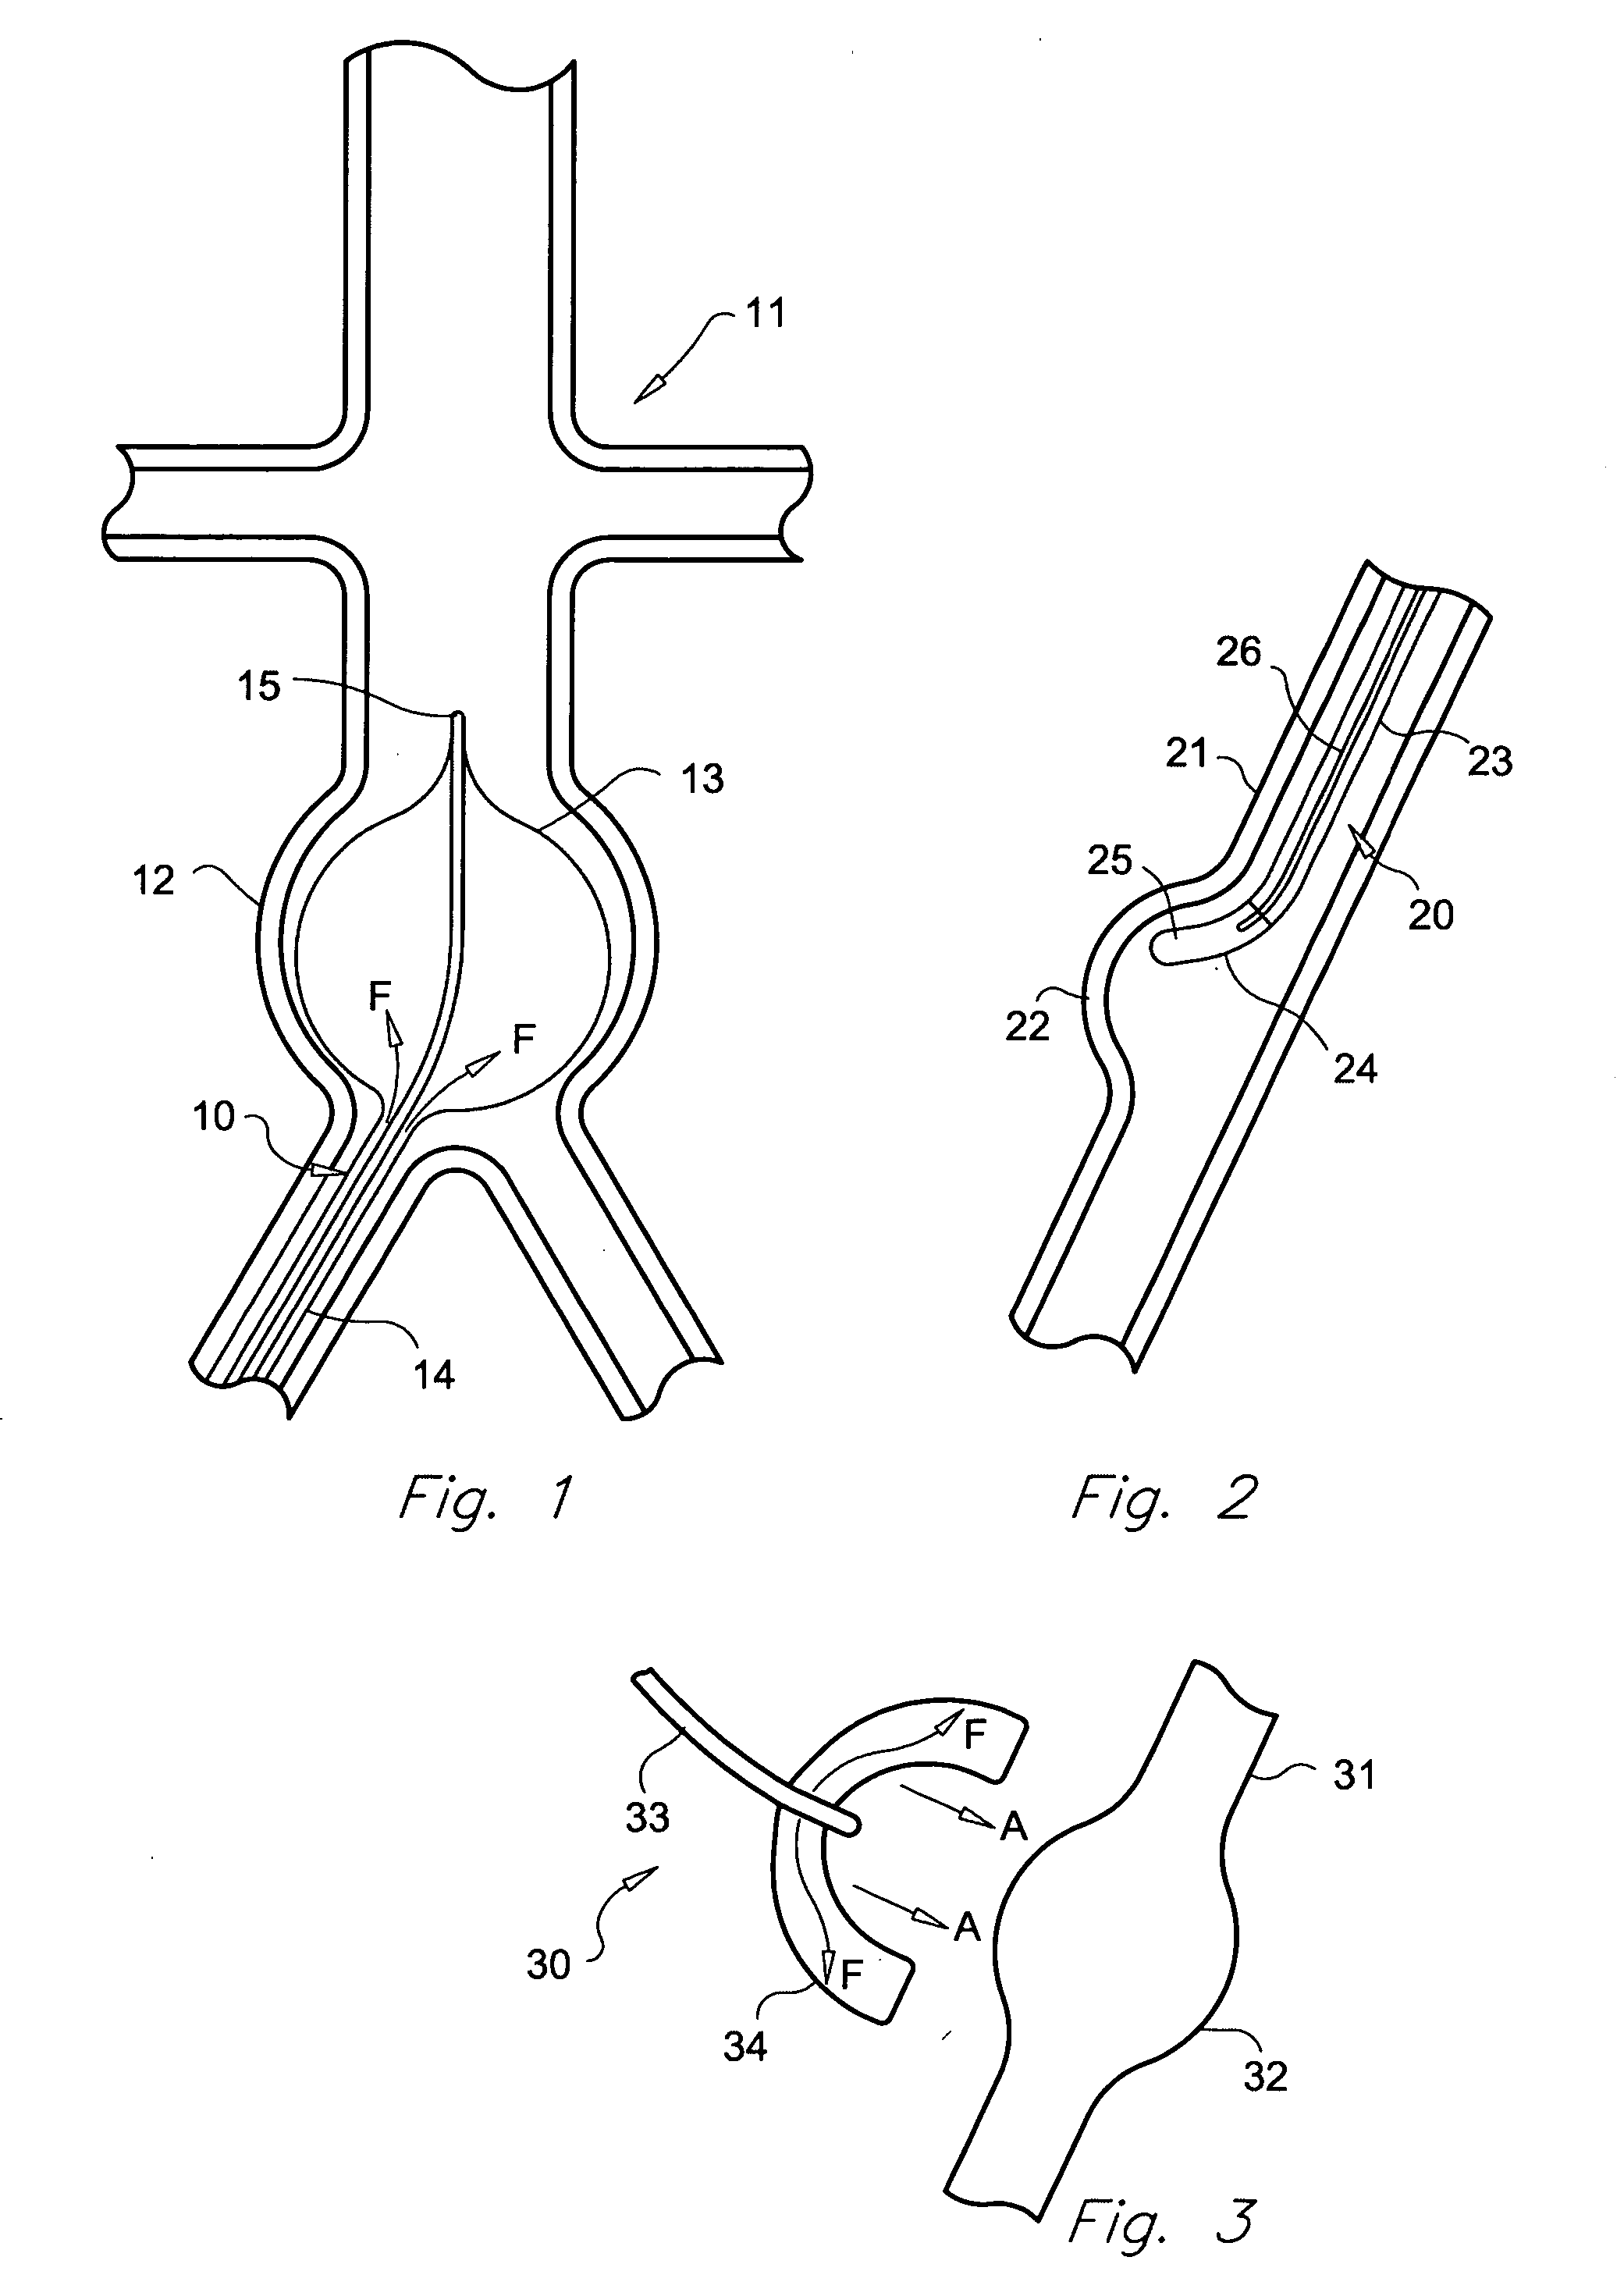 Method for treatment of aneurysms